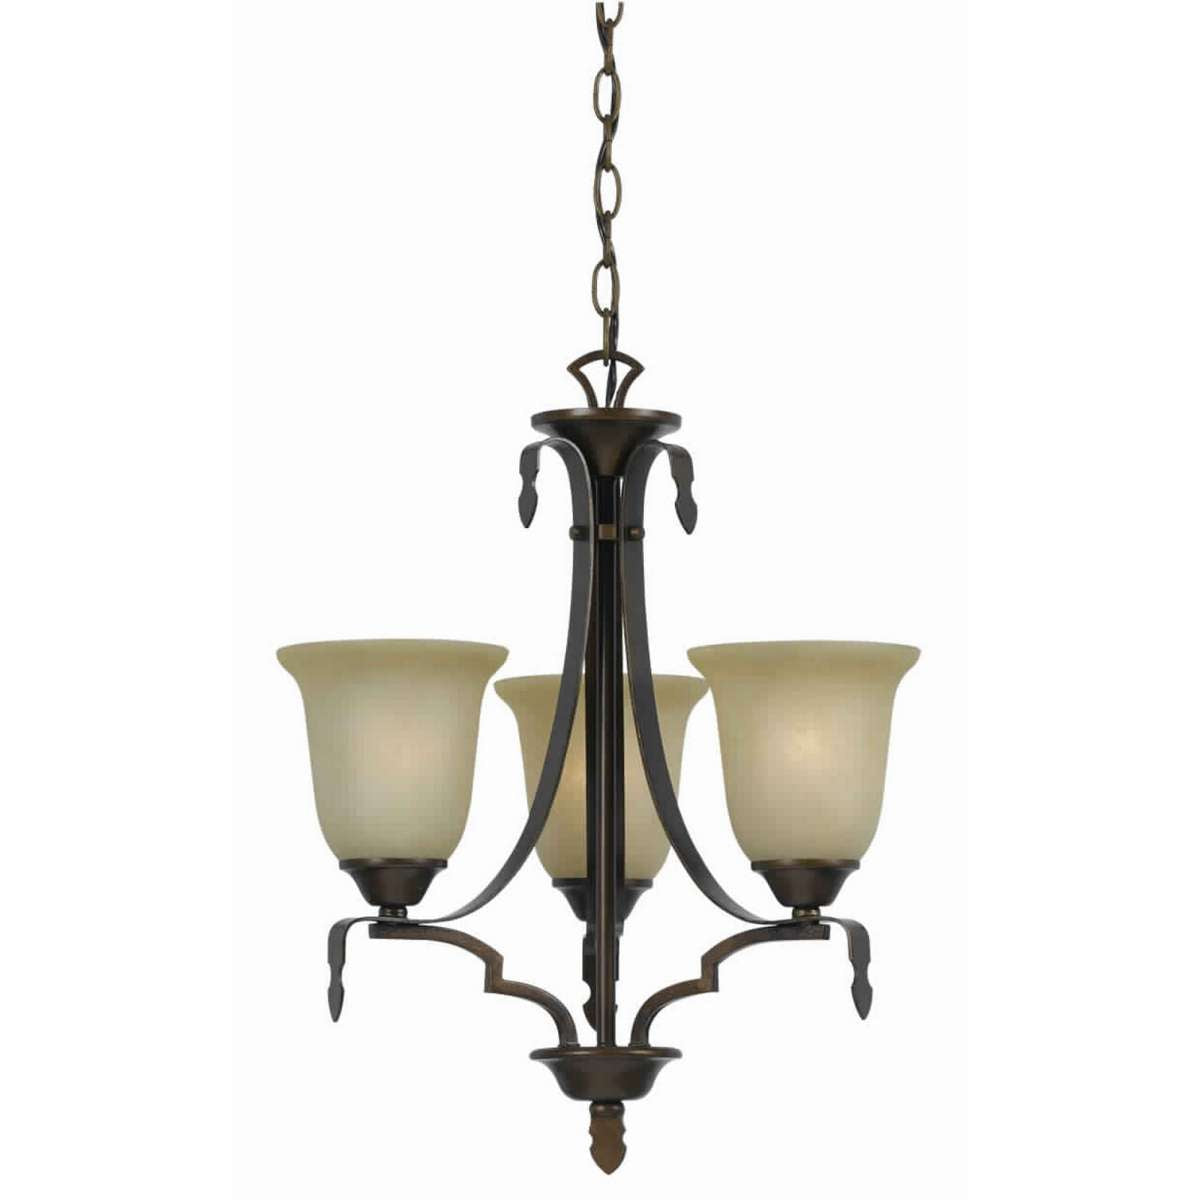 3 Bulb Uplight Chandelier With Metal Frame And Glass Shade,Bronze And Beige By Benzara